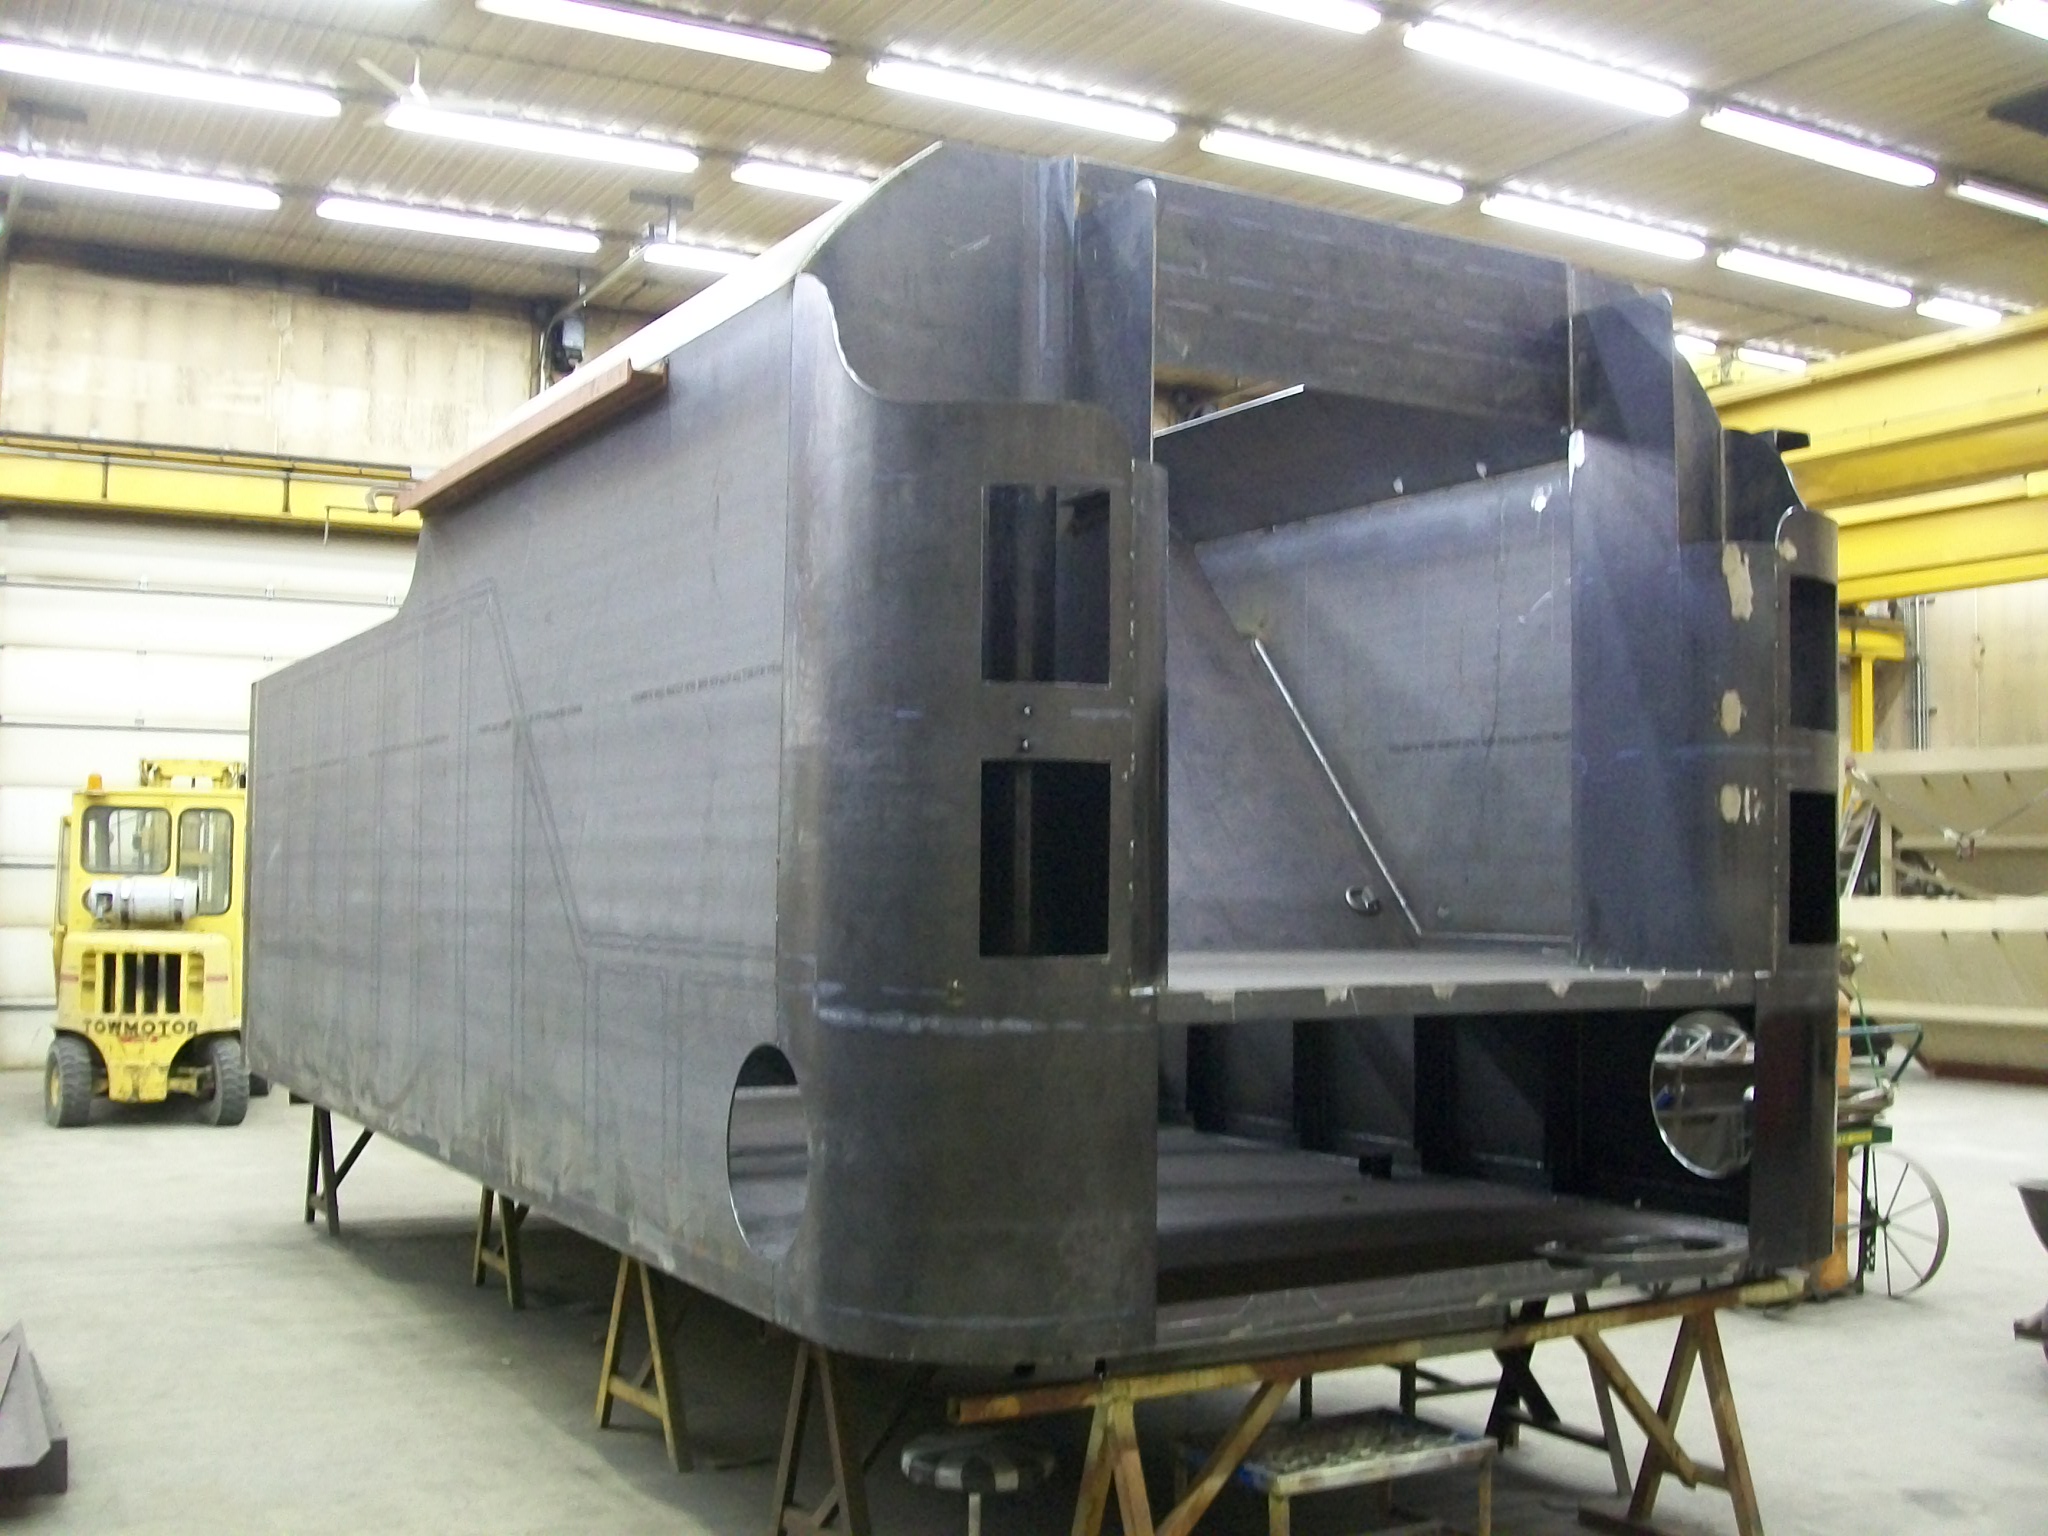 New C&NW 1385 tender tank under construction at DRM Industries. March 5, 2012. Photo by DRM Industries